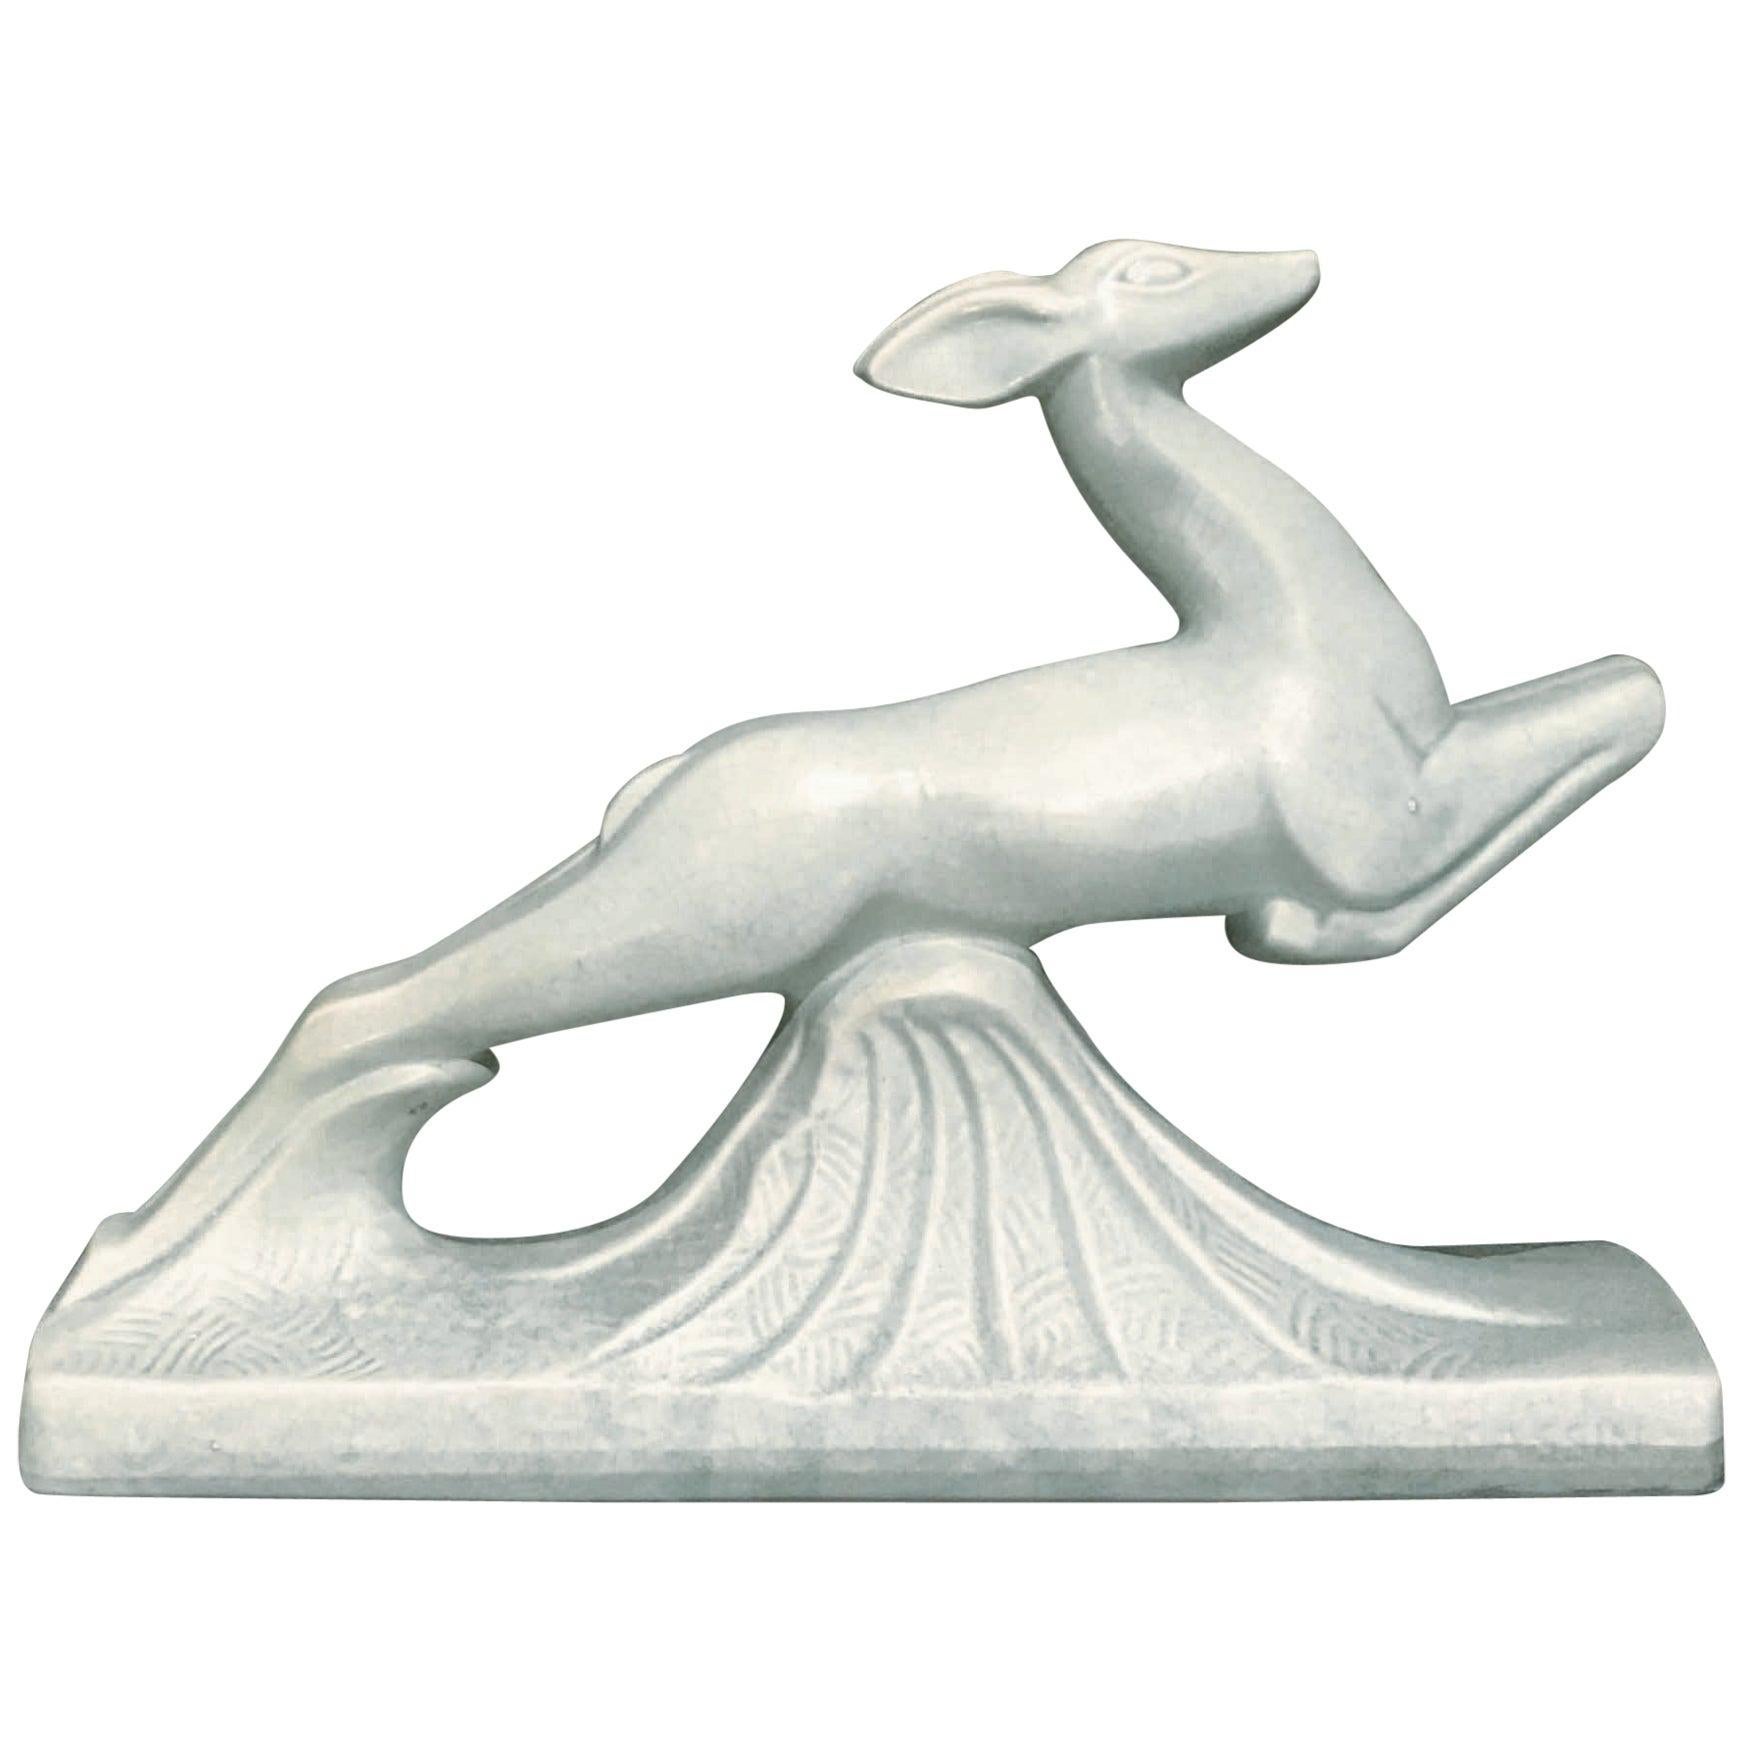 Early 20th Century Art Deco Crackle Glazed Ceramic Figure of a Jumping Antelope For Sale